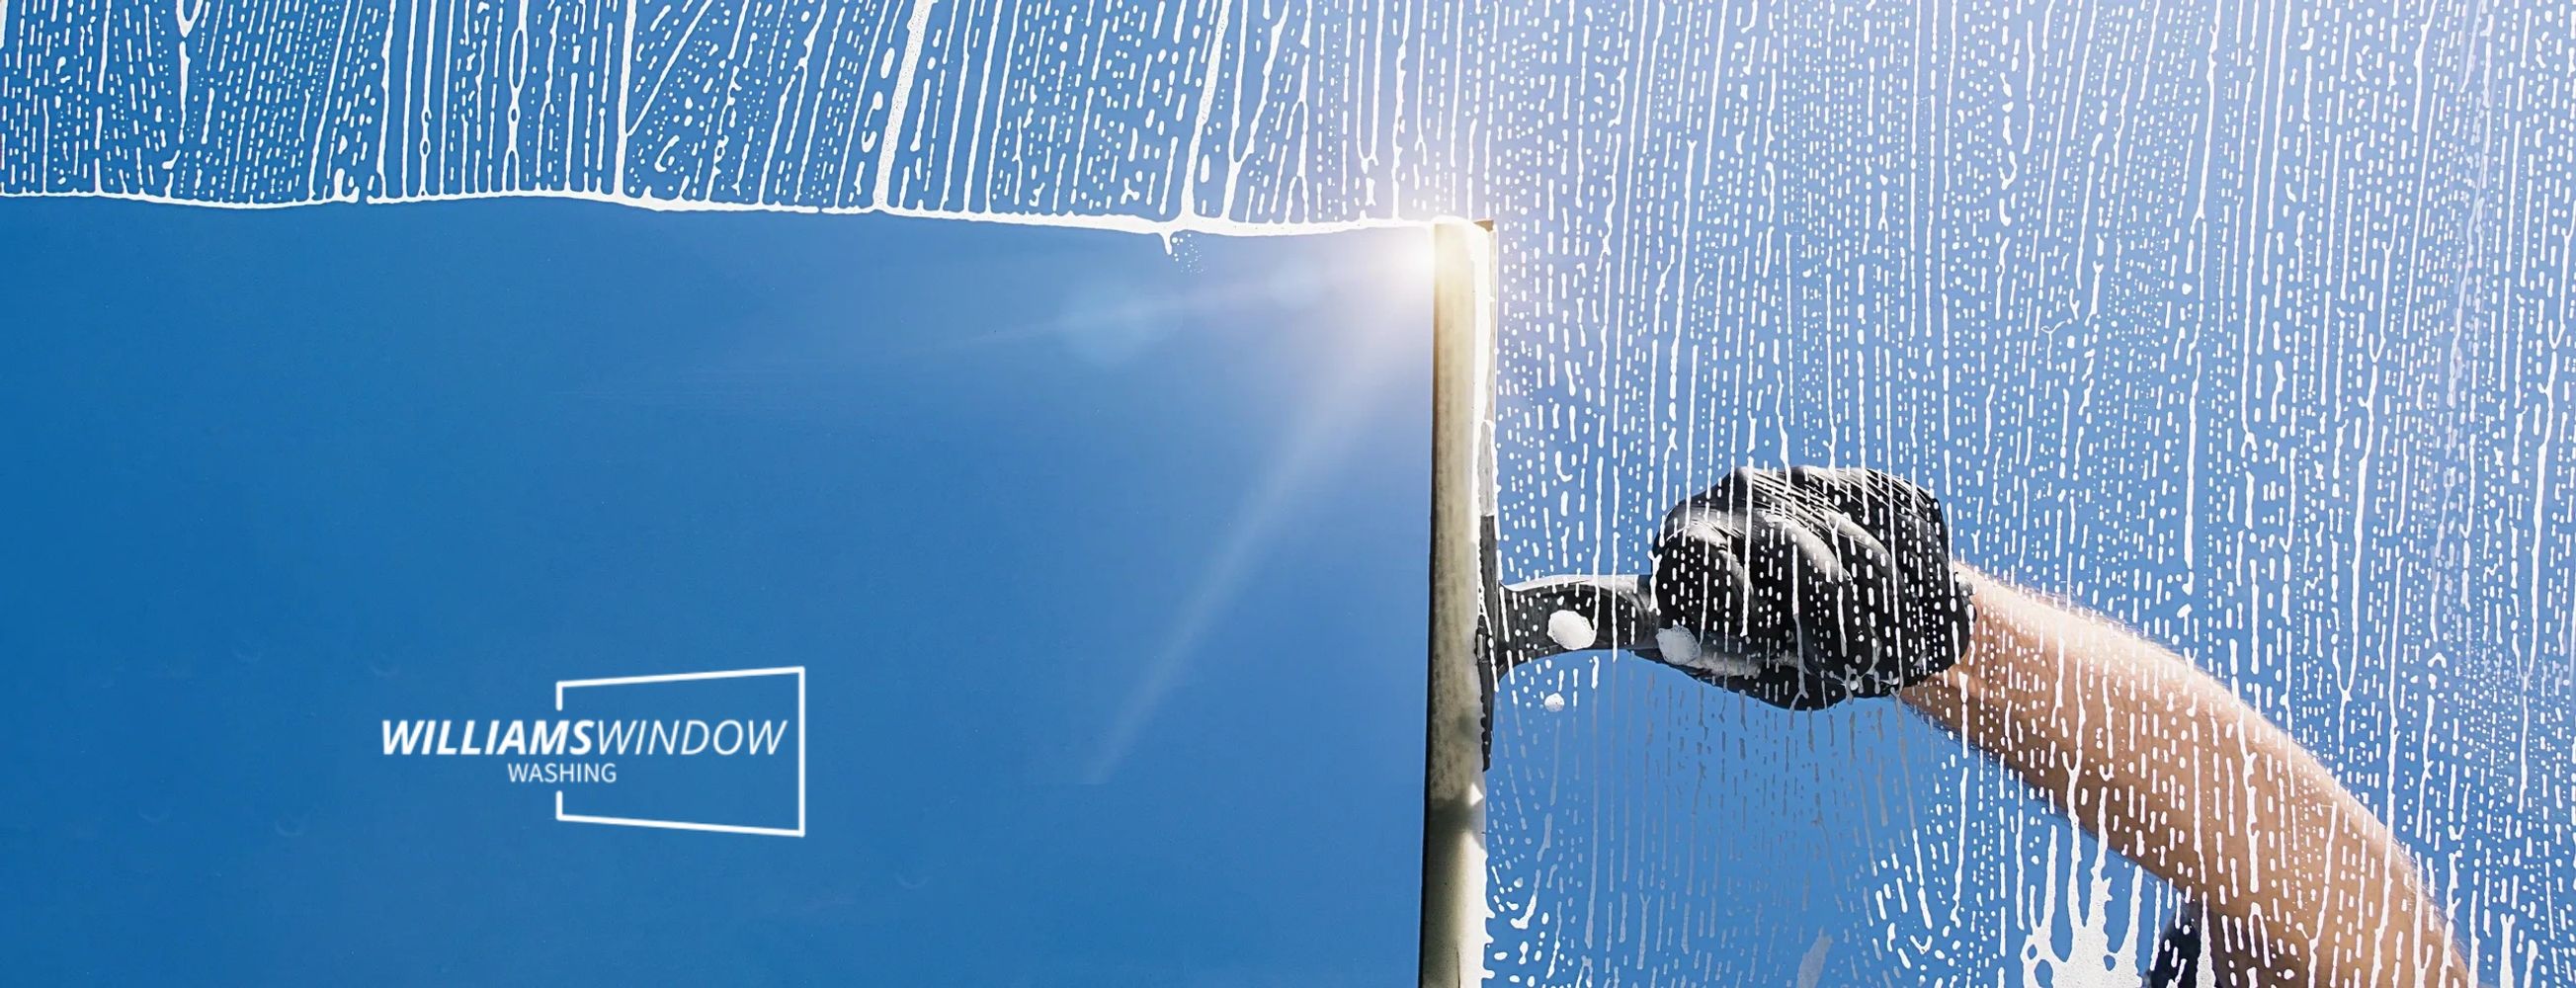 Cleaning Windows With A Squeegee - Tips From The Pros - NICK'S Window  Cleaning